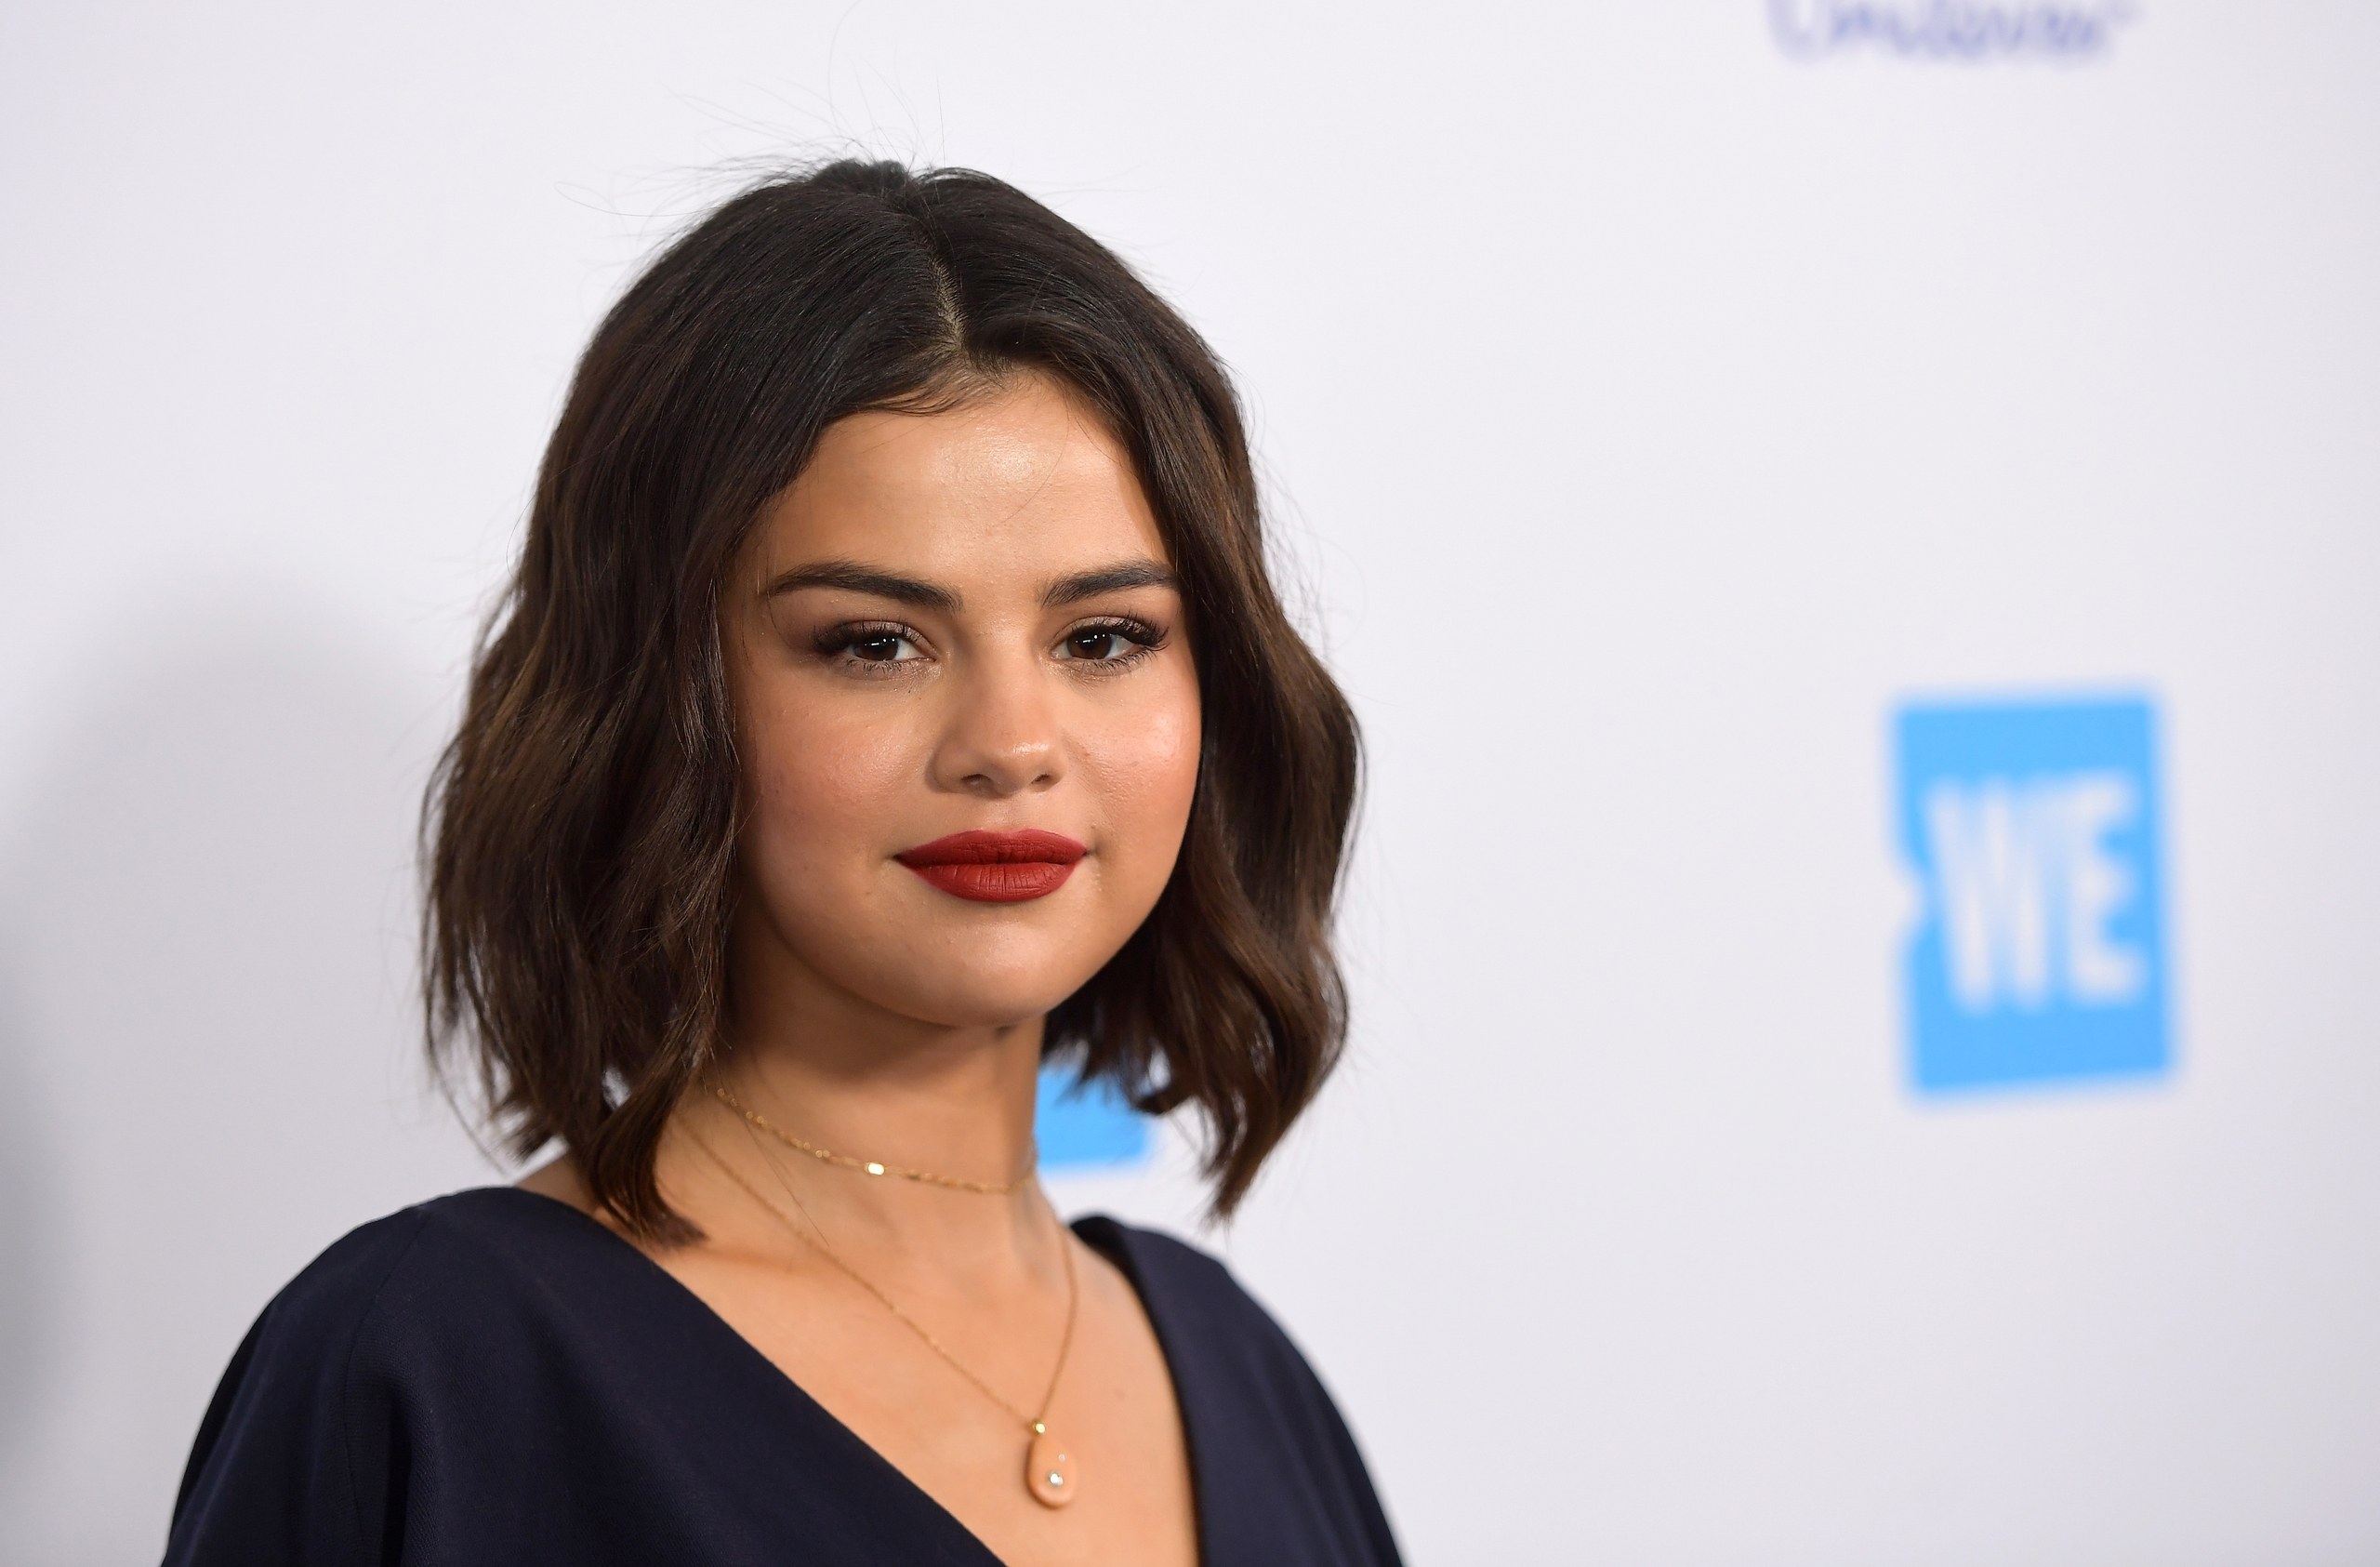 Selena Gomez shares fears she'll be 'alone forever